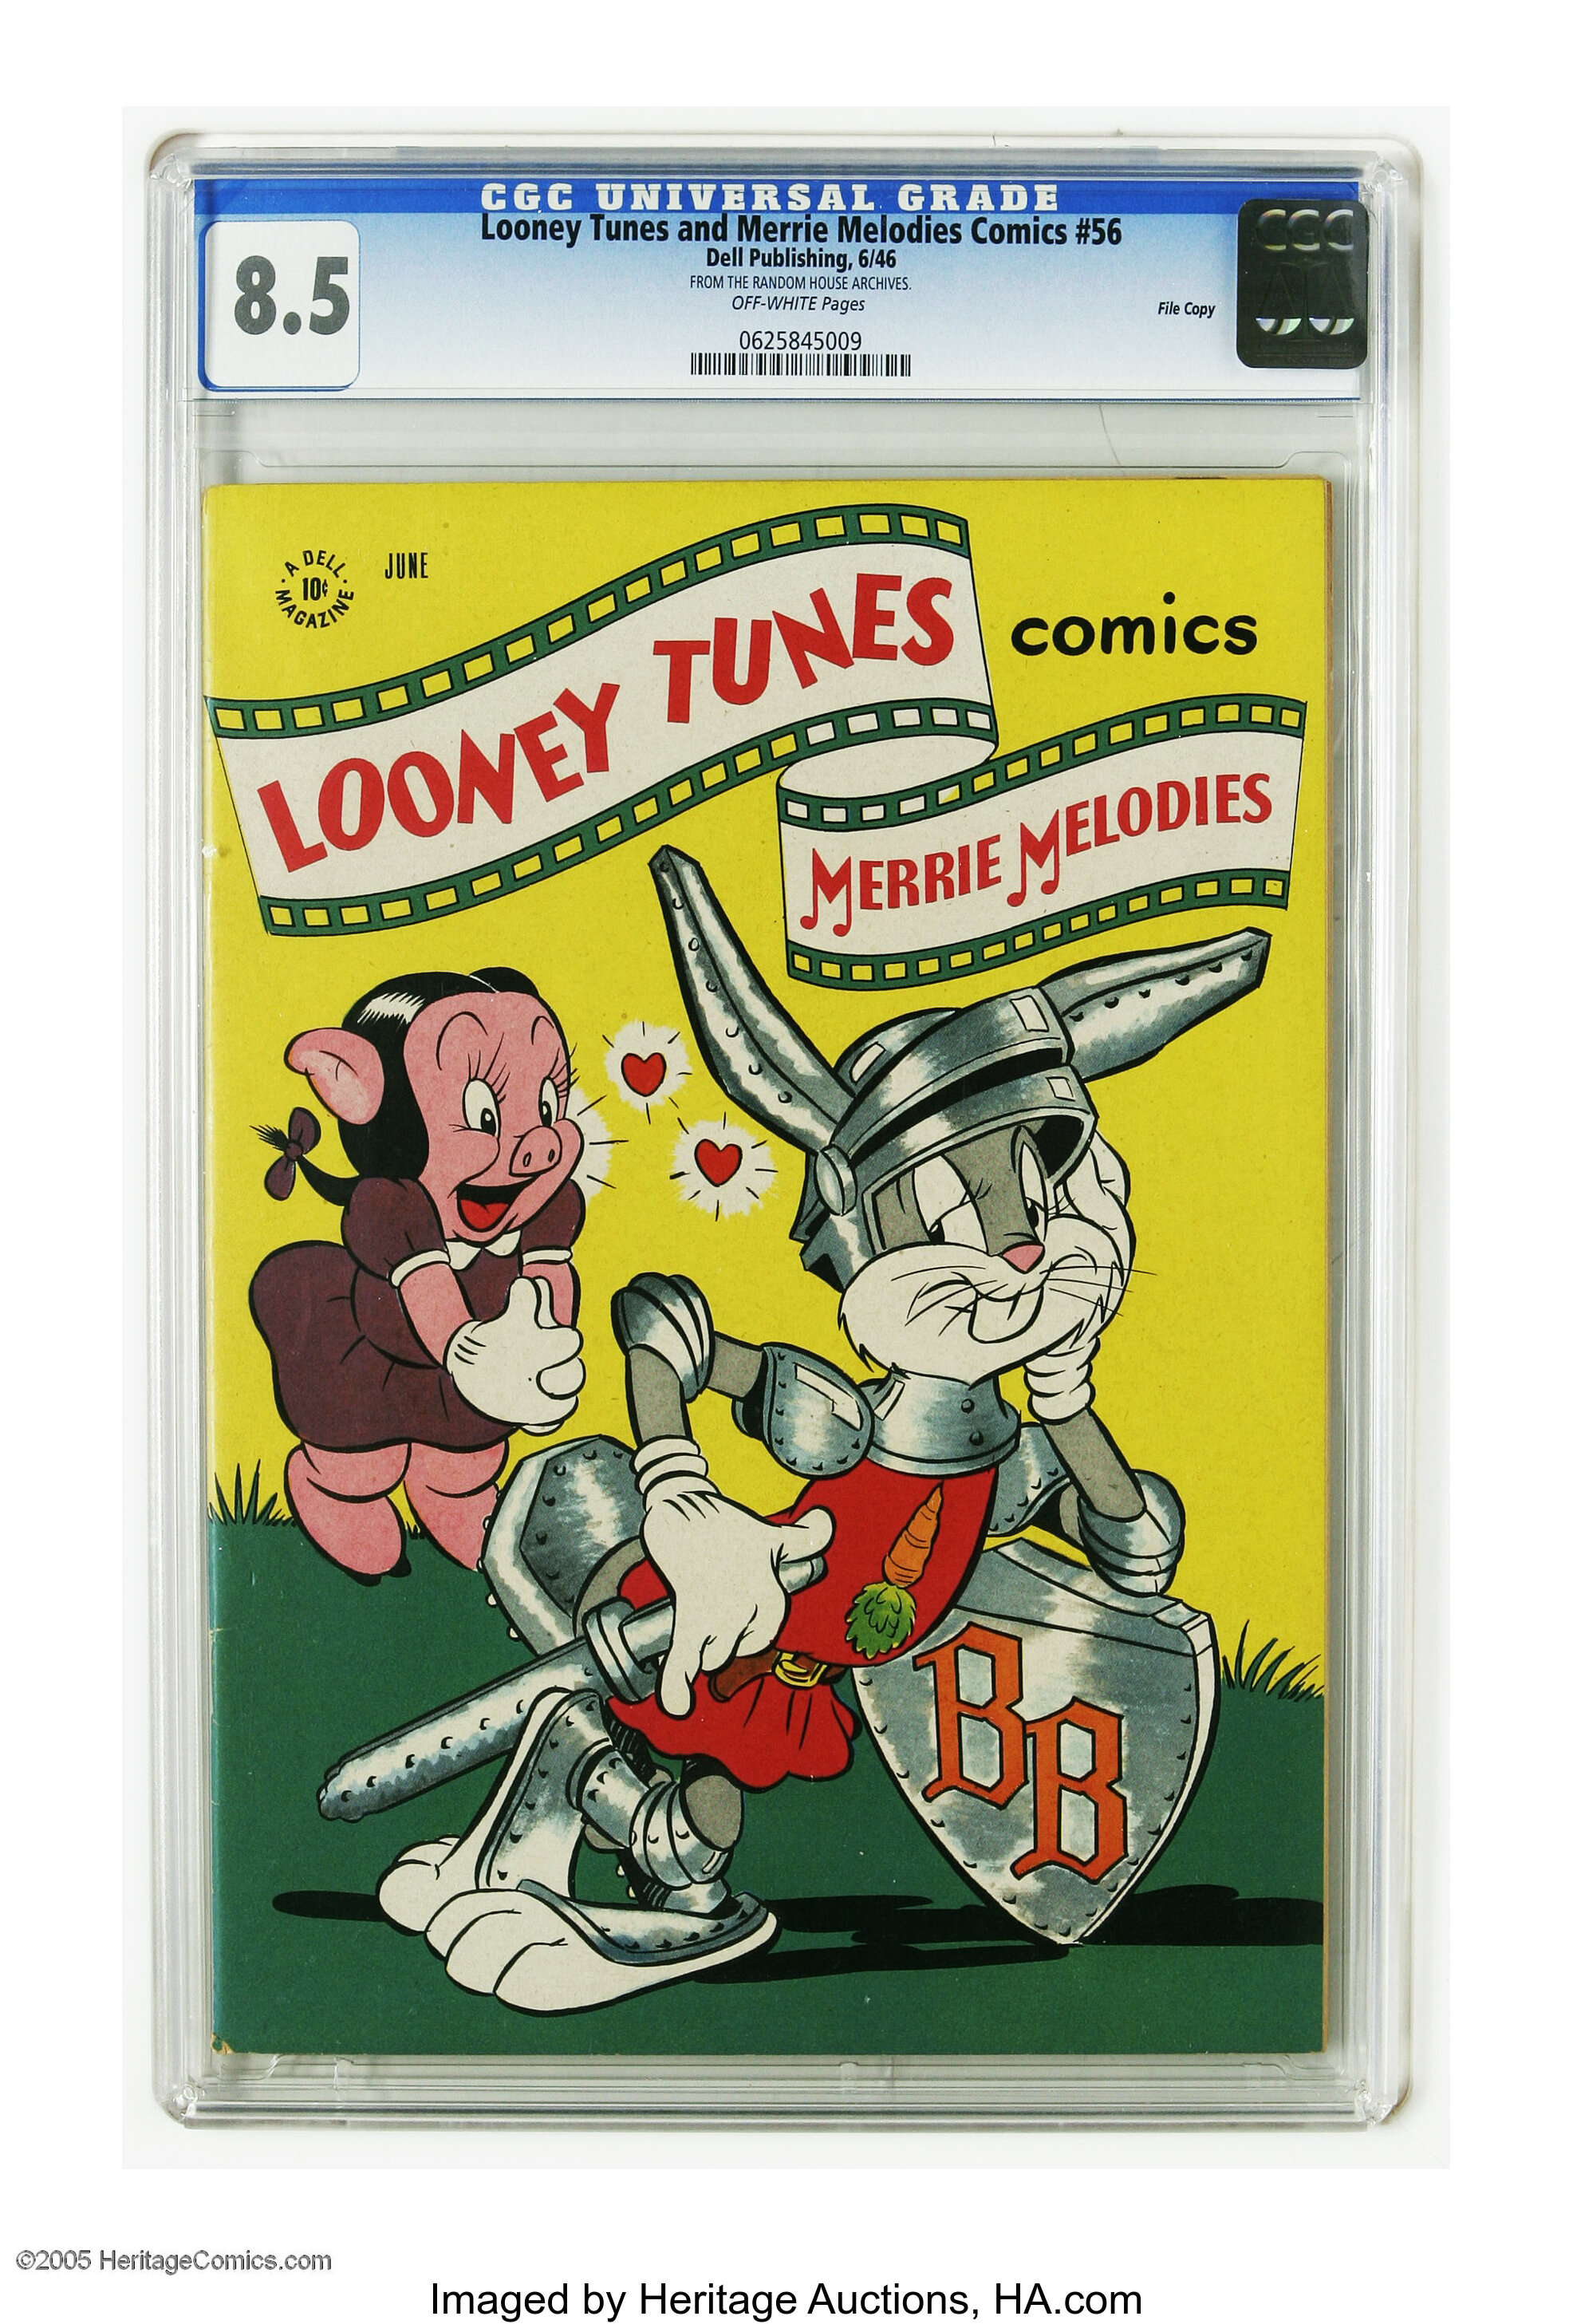 Looney Tunes and Merrie Melodies Comics #56 File Copy (Dell, 1946 ...